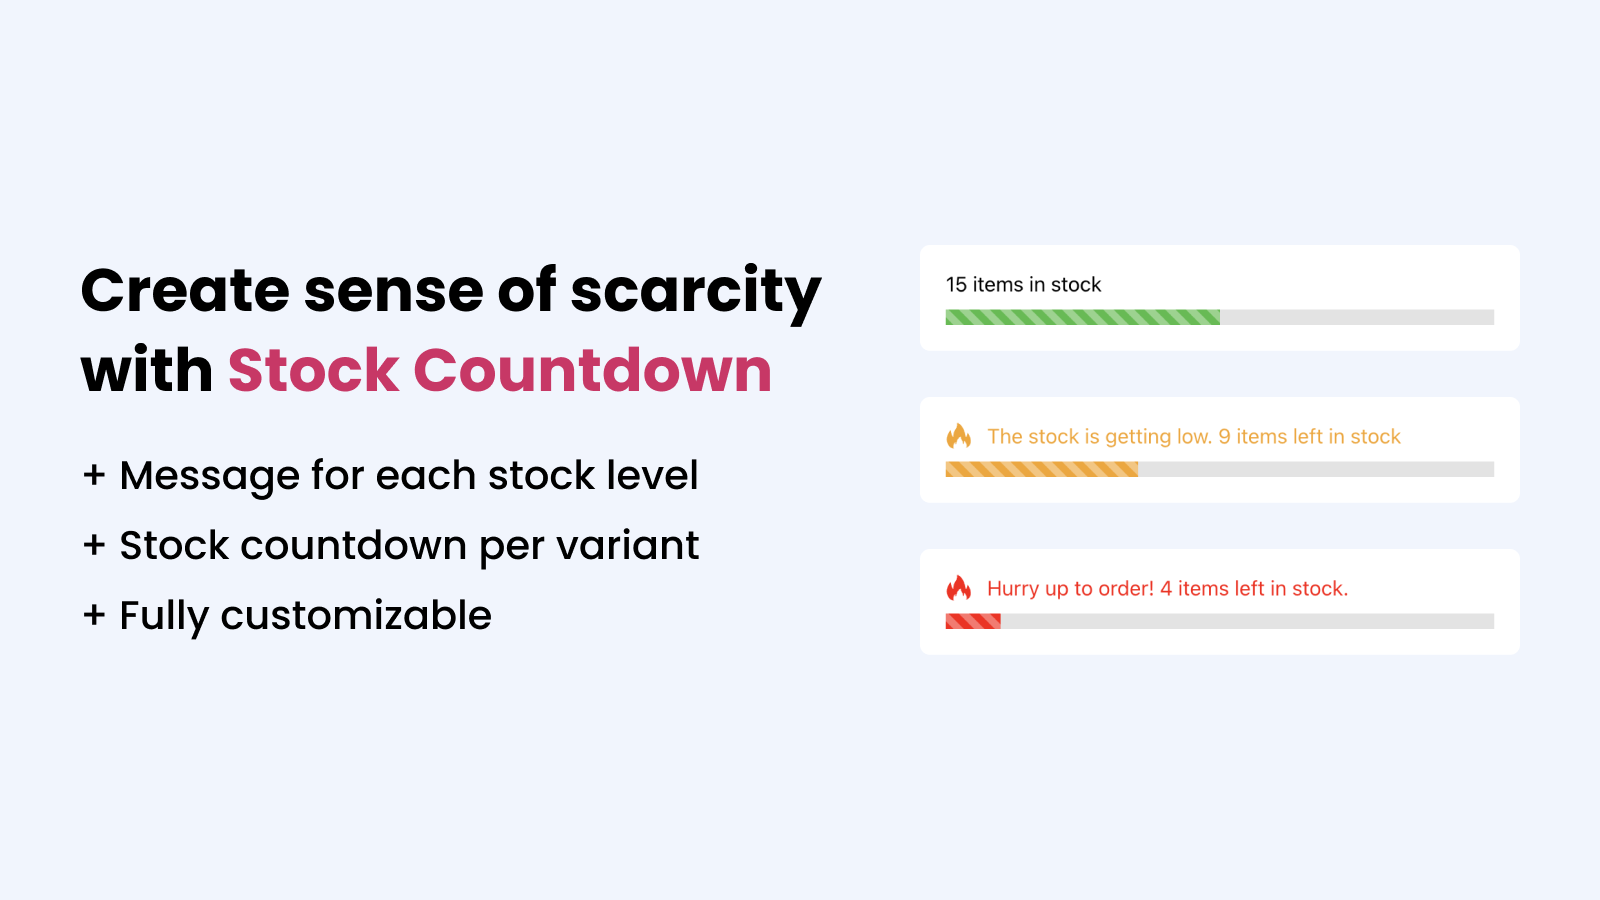 Create sense of scarcity with stock countdown